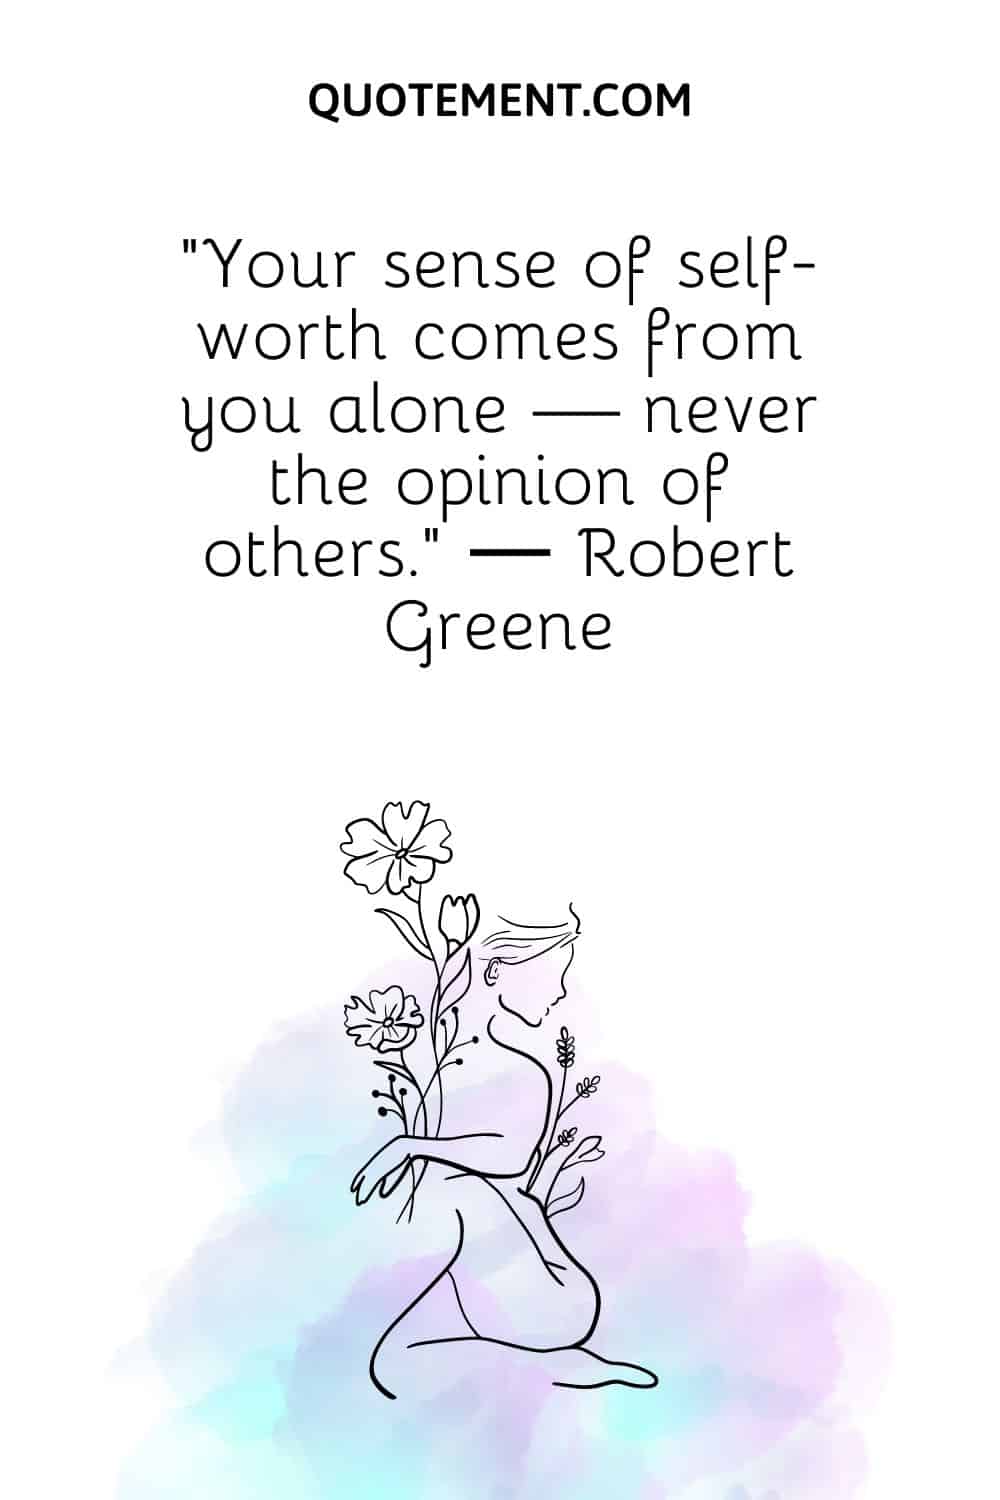 Your sense of self-worth comes from you alone — never the opinion of others